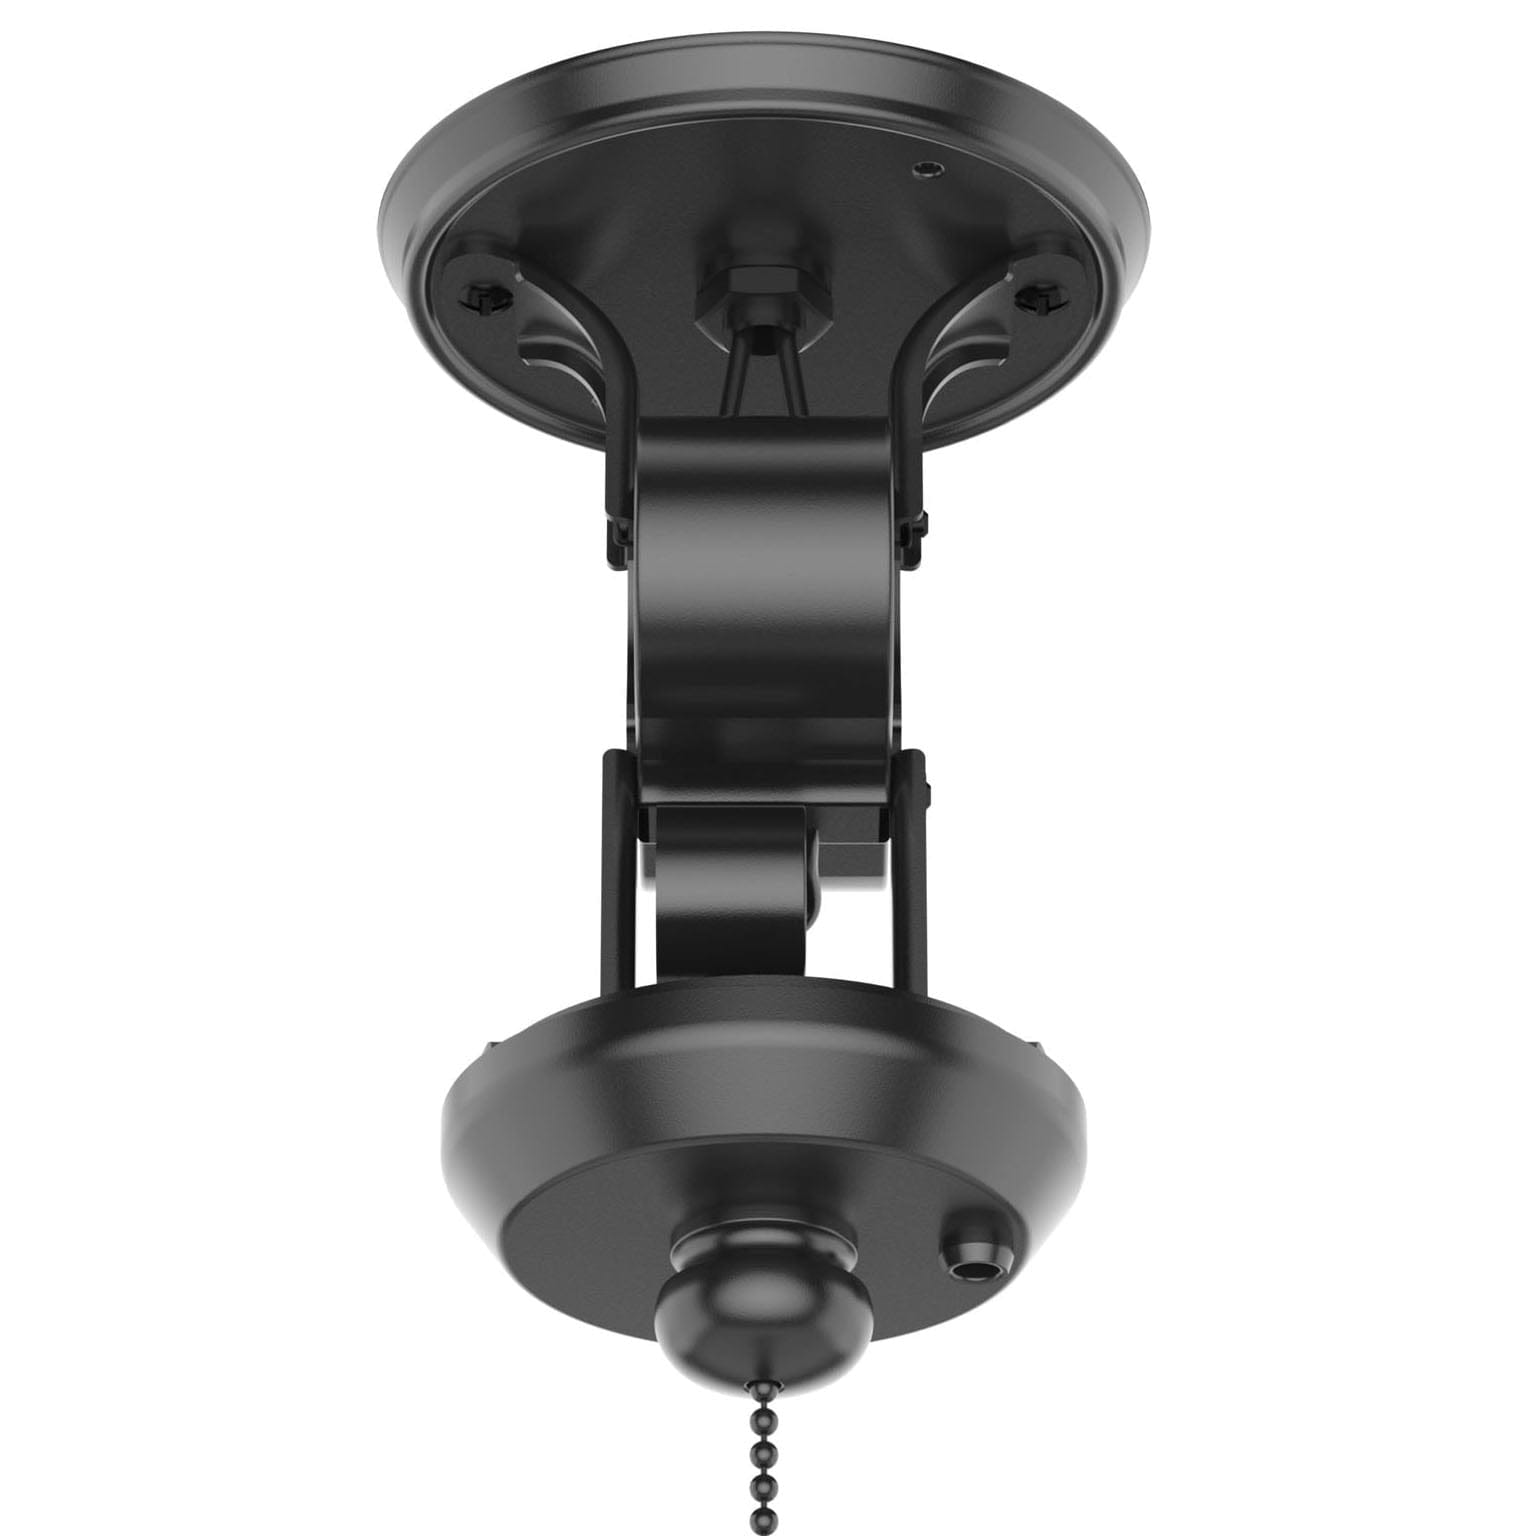 Ceiling Fan Accessories And Attachments